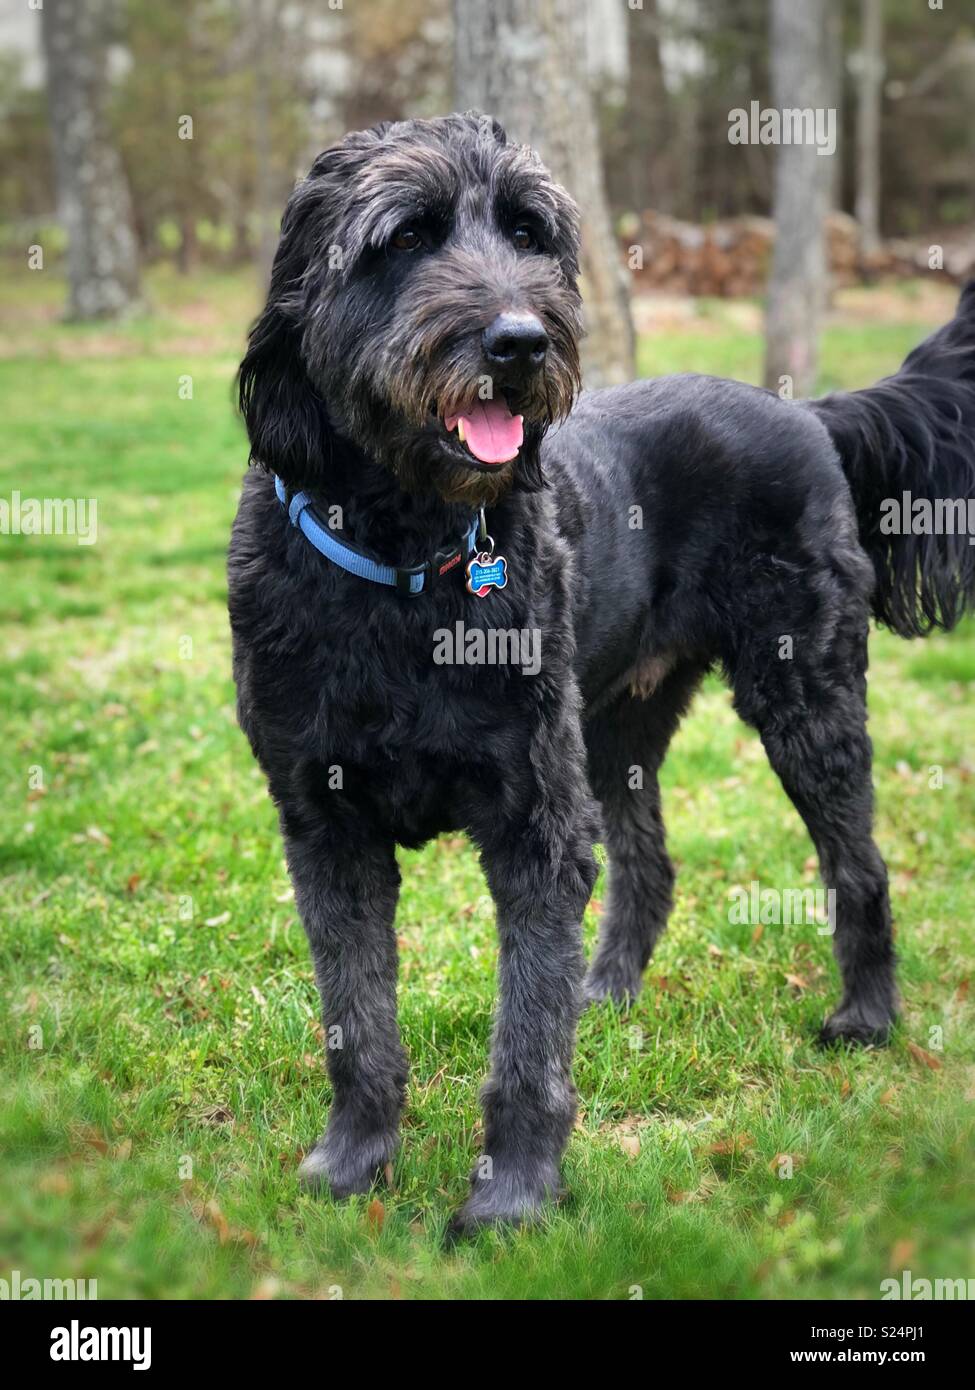 Black Australian Shepard Standard Poodle Mix Aussie Doodle Adult Male Dog Standing Cute Medium Thick Shaggy Hair Looking Calm In Grassy Field With Trees Stock Photo Alamy